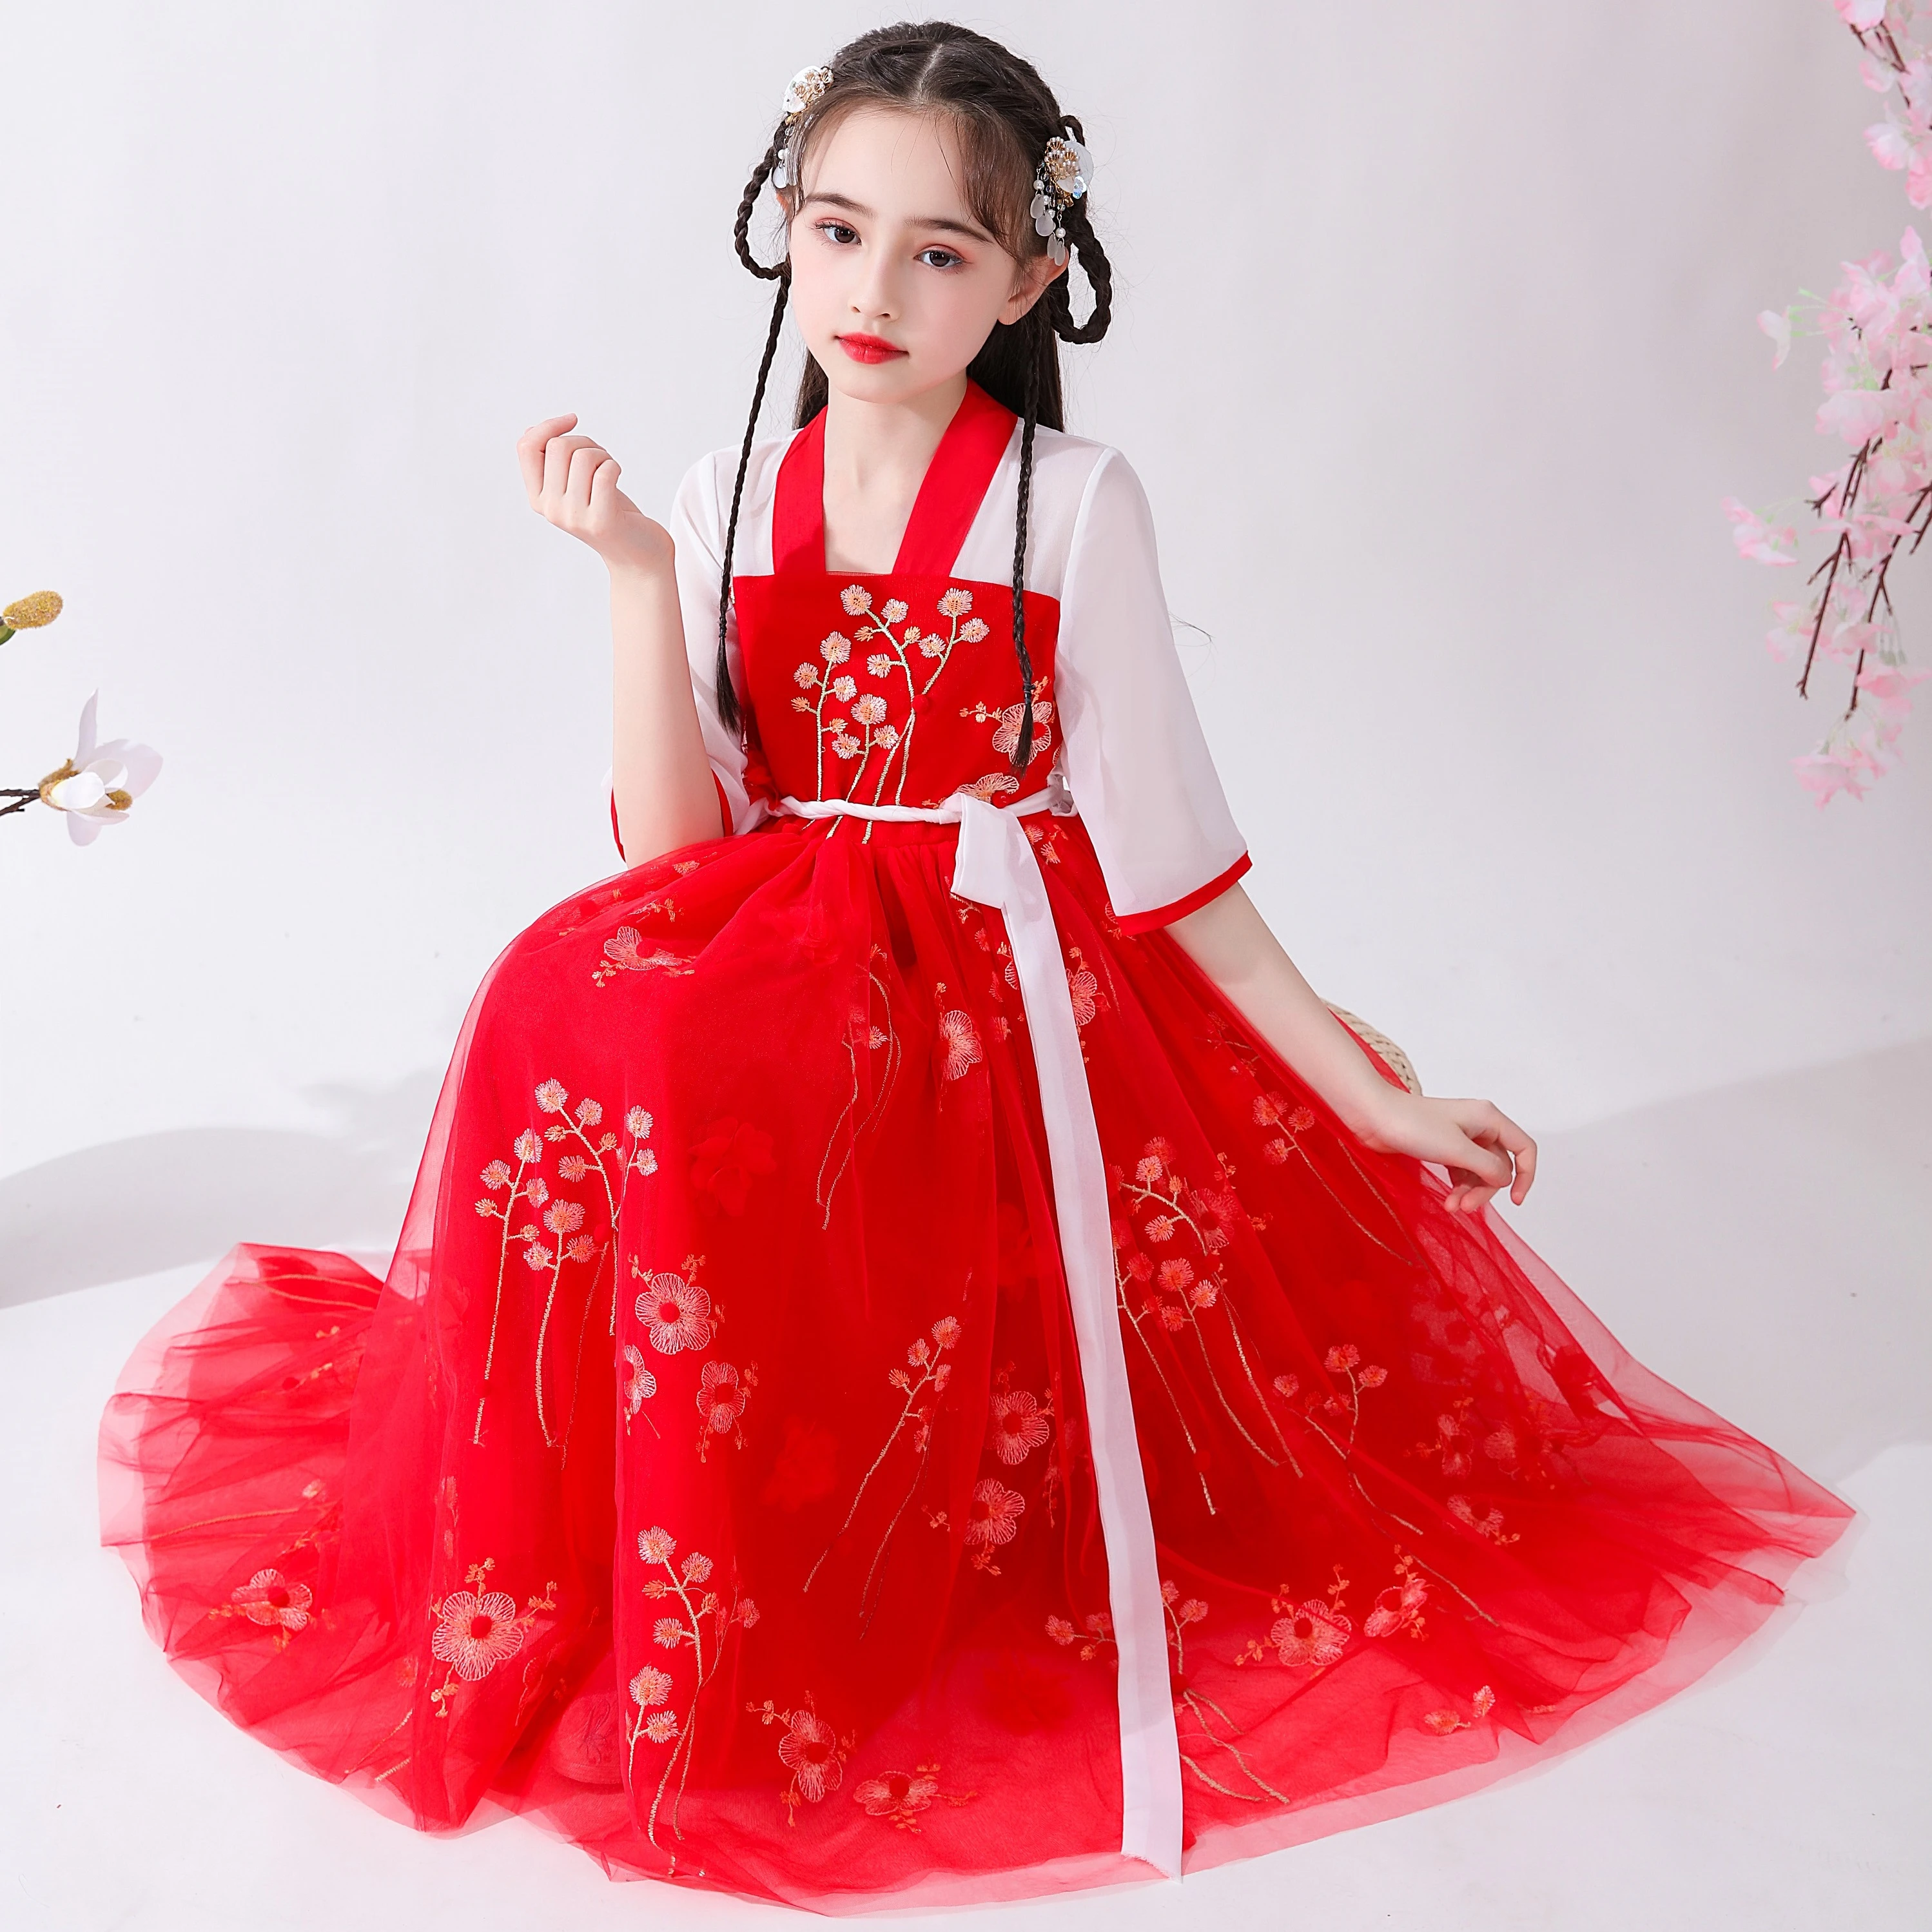 New Chinese style girl long dress Flower girl dress for wedding party Shiny Chiffon Princess Dress for kids